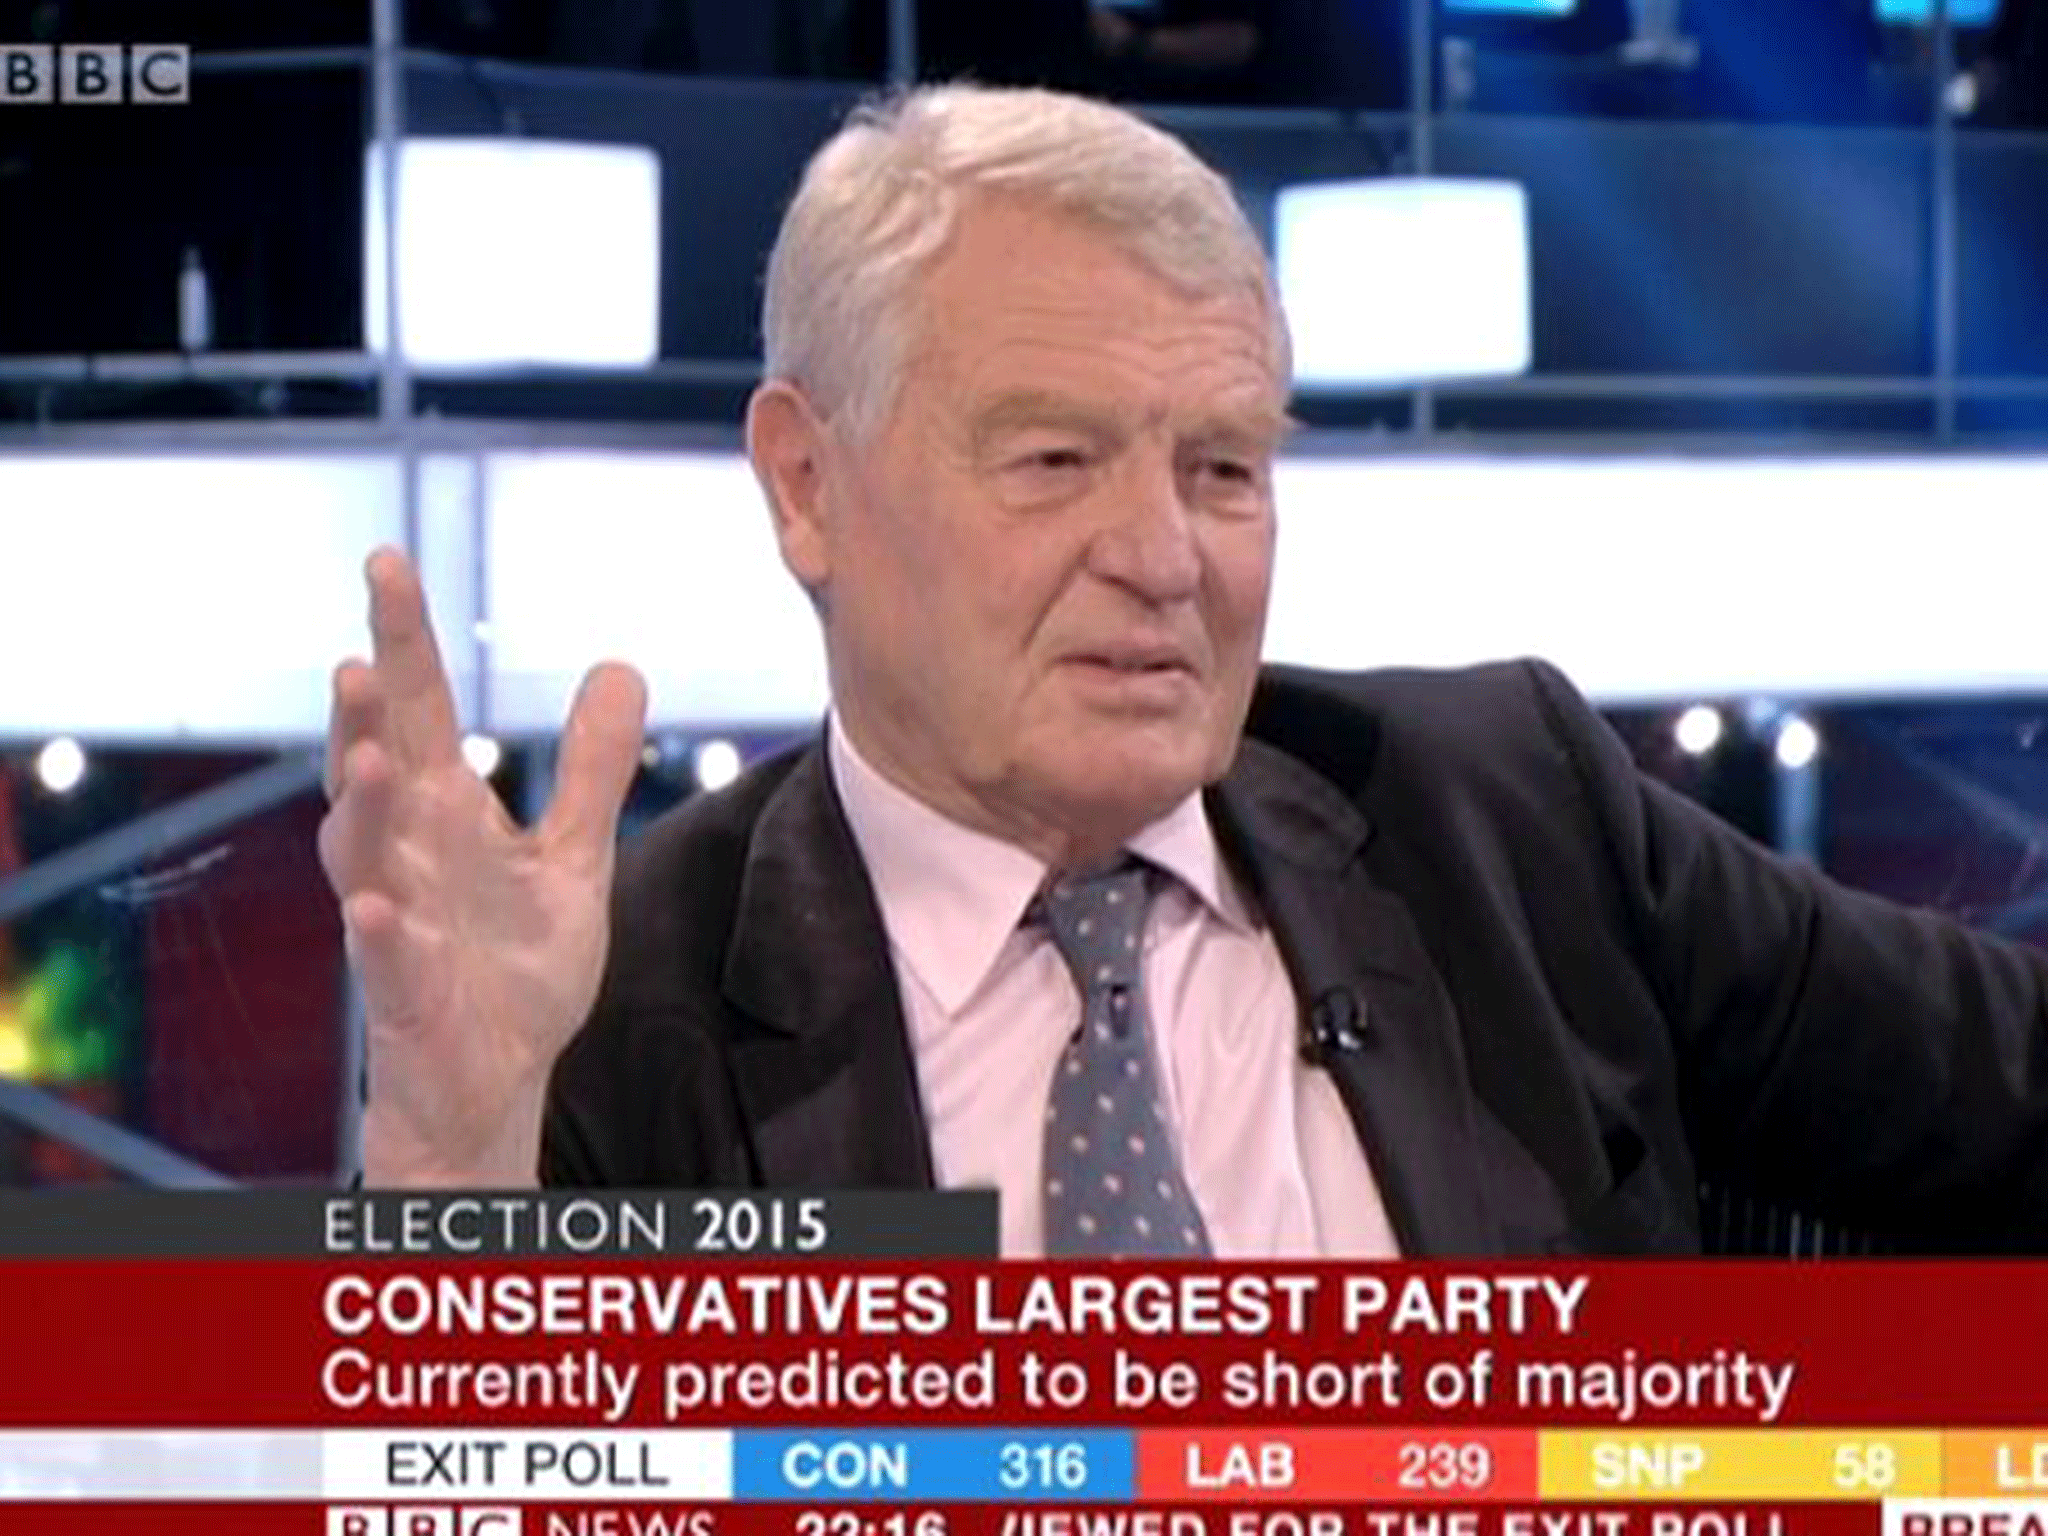 Paddy Ashdown speaks to Andrew Neil on the BBC about the exit poll on election night